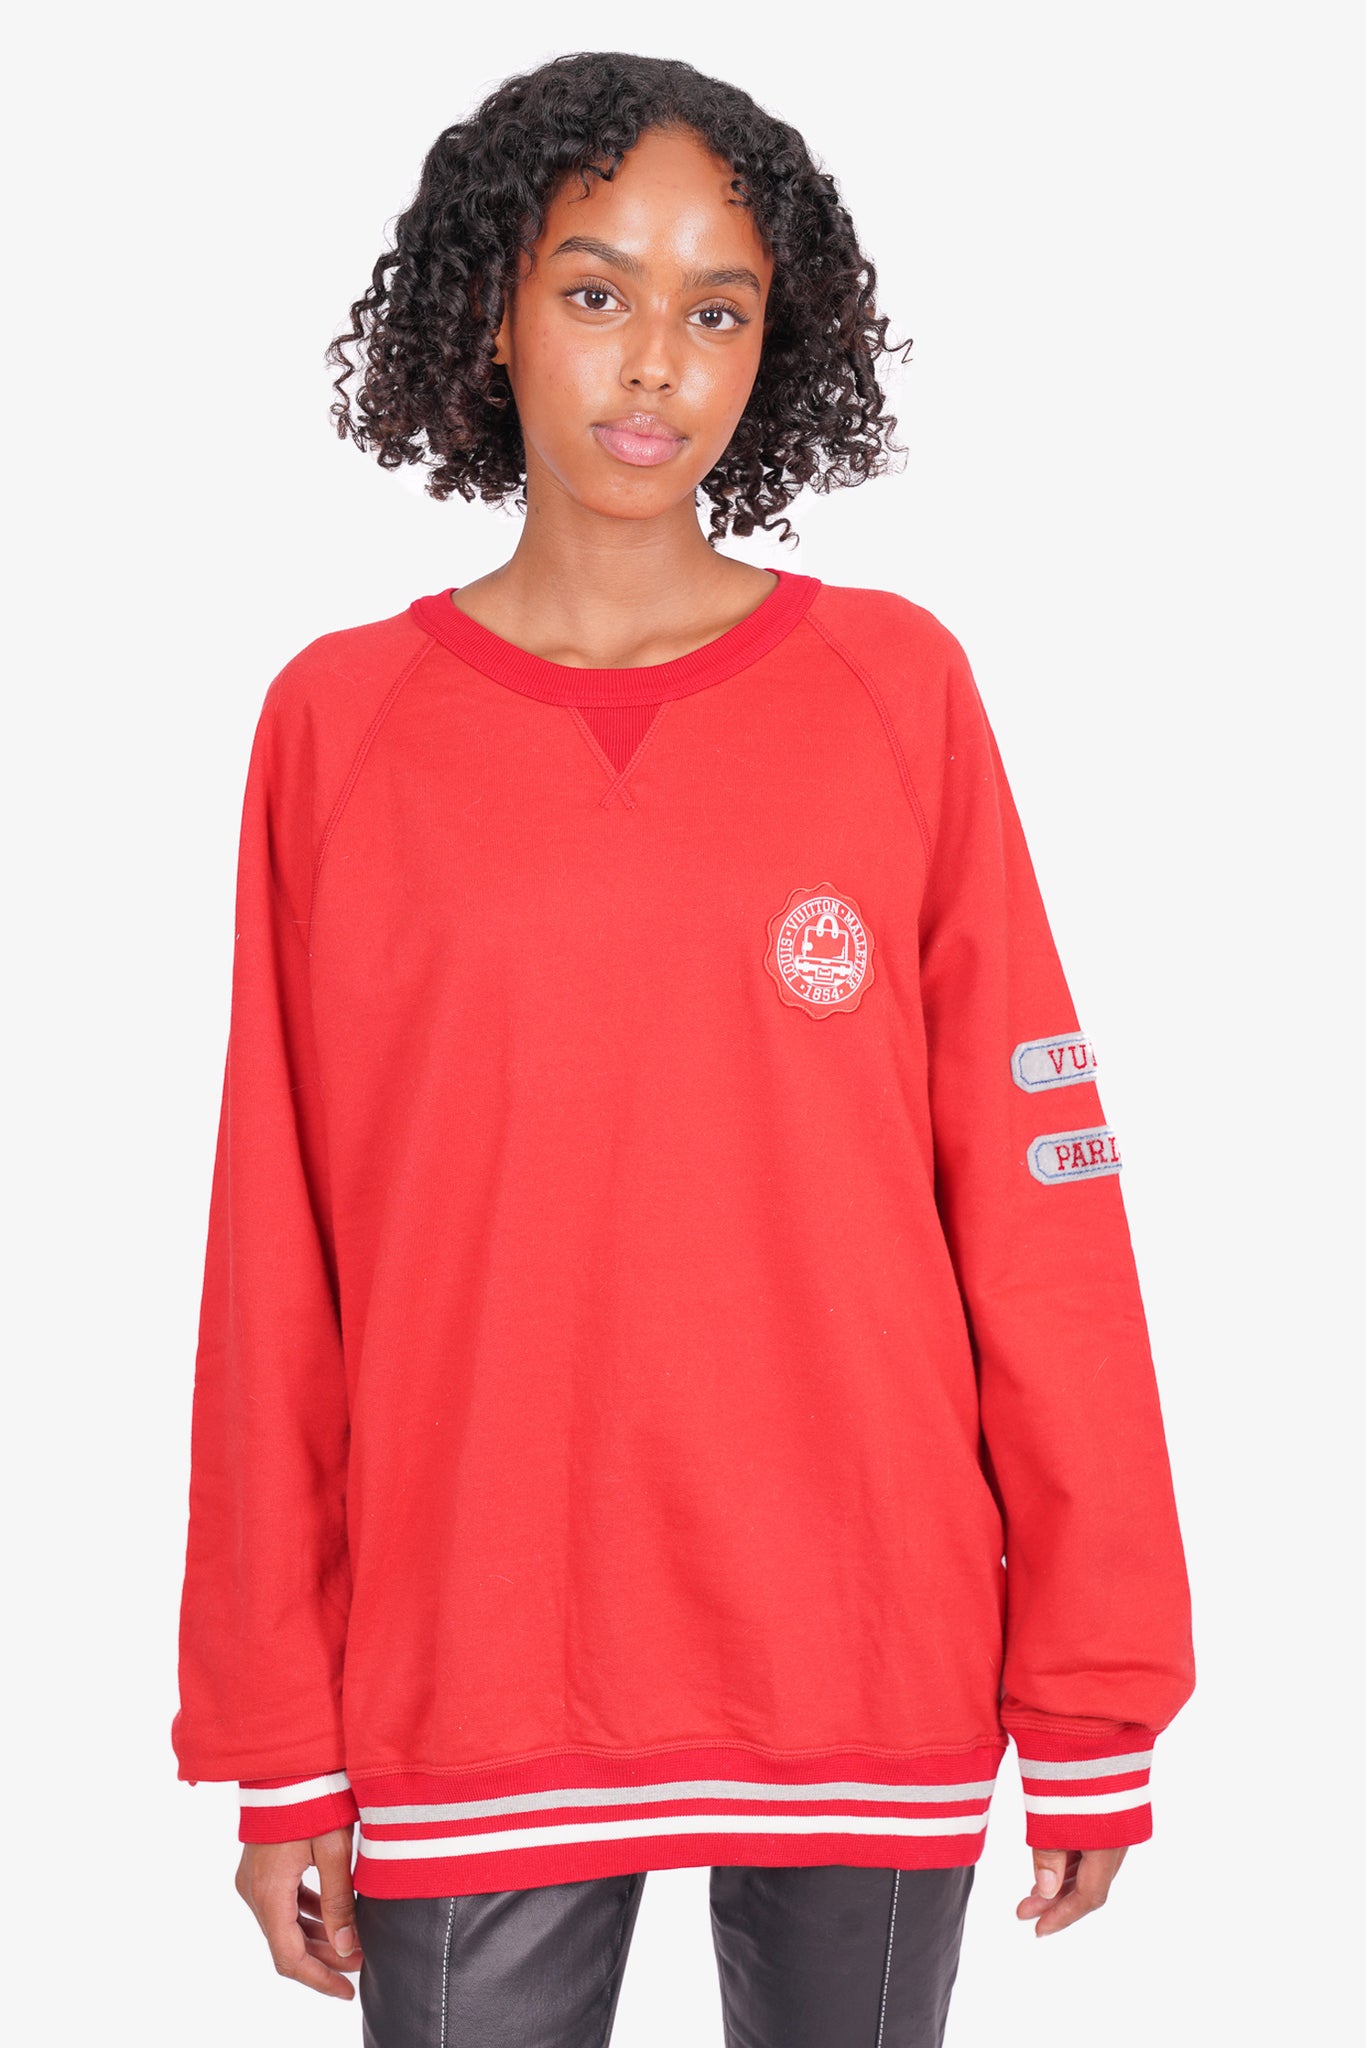 Save BIG on Louis Vuitton x Virgil Abloh Orange Teddy Sweatshirt Size XL  Louis Vuitton . Find the top products at great prices with excellent  customer service